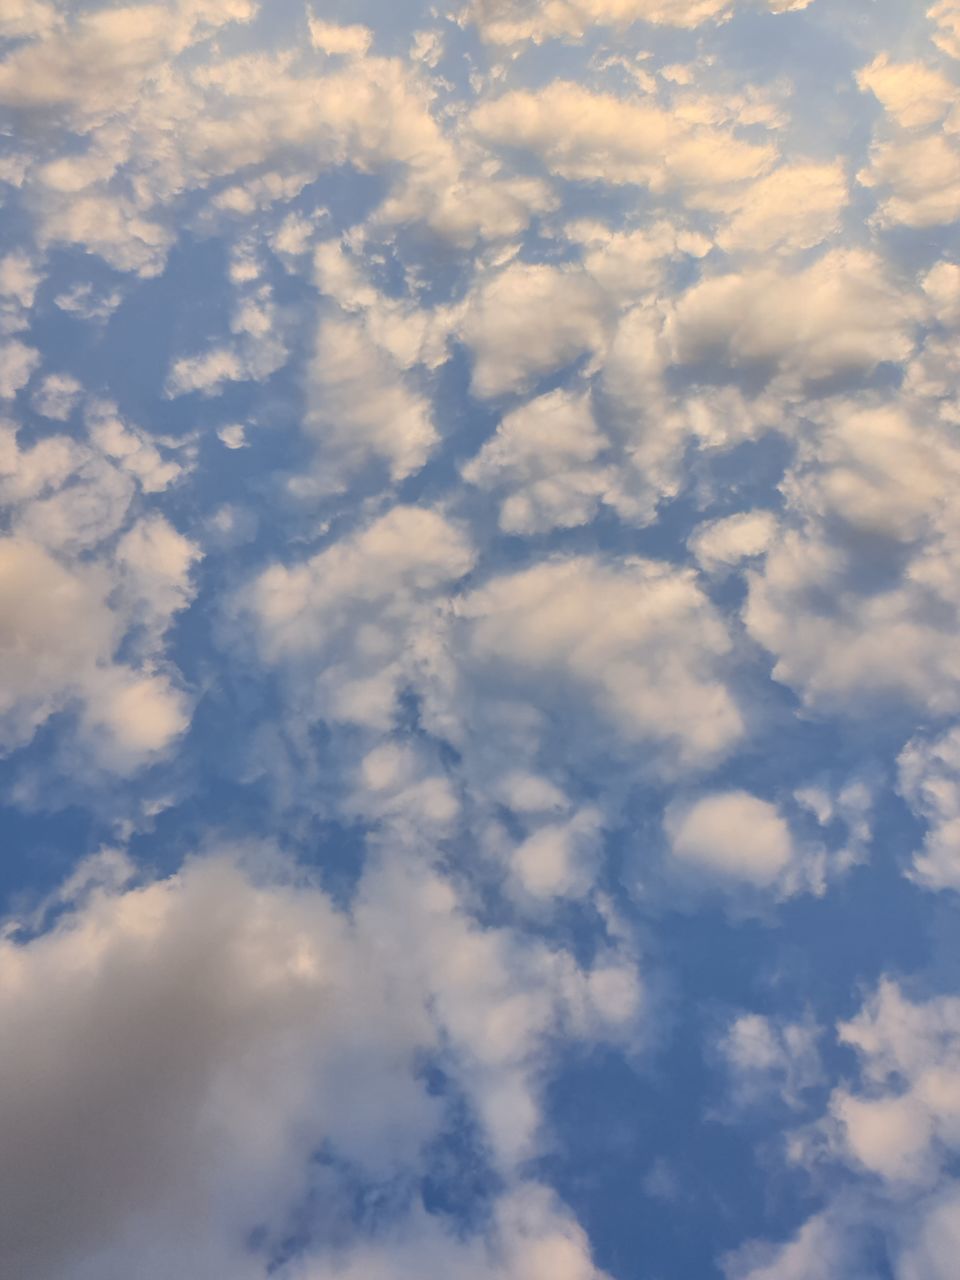 SCENIC VIEW OF CLOUDS IN SKY